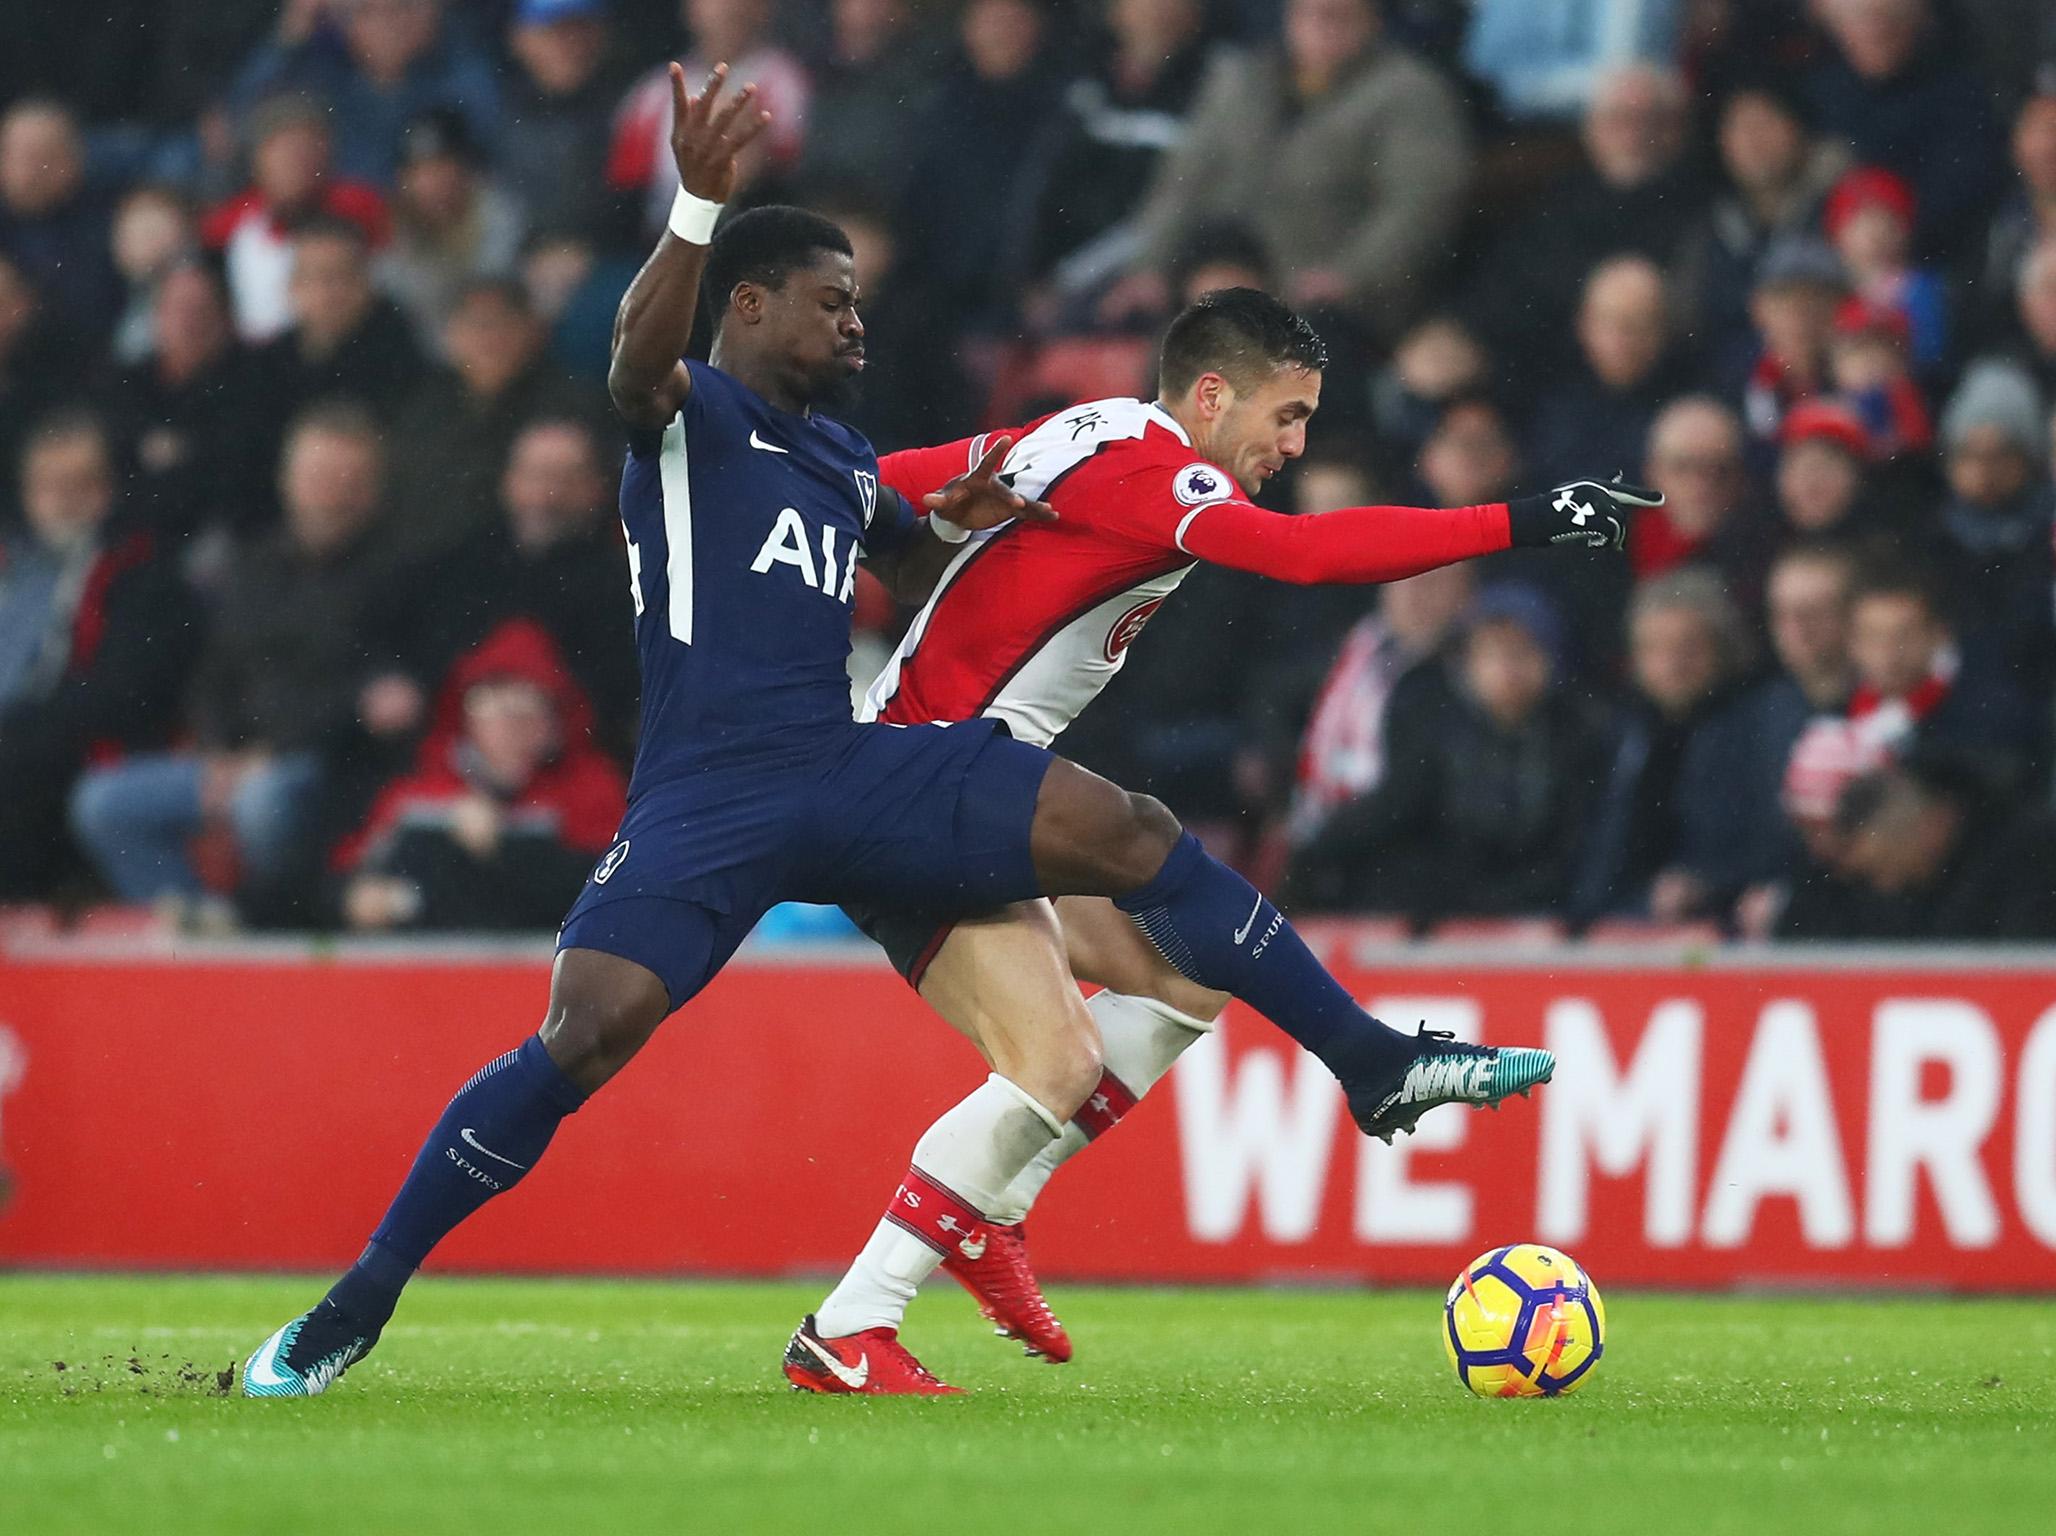 Dusan Tadic and Serge Aurier fight for possession